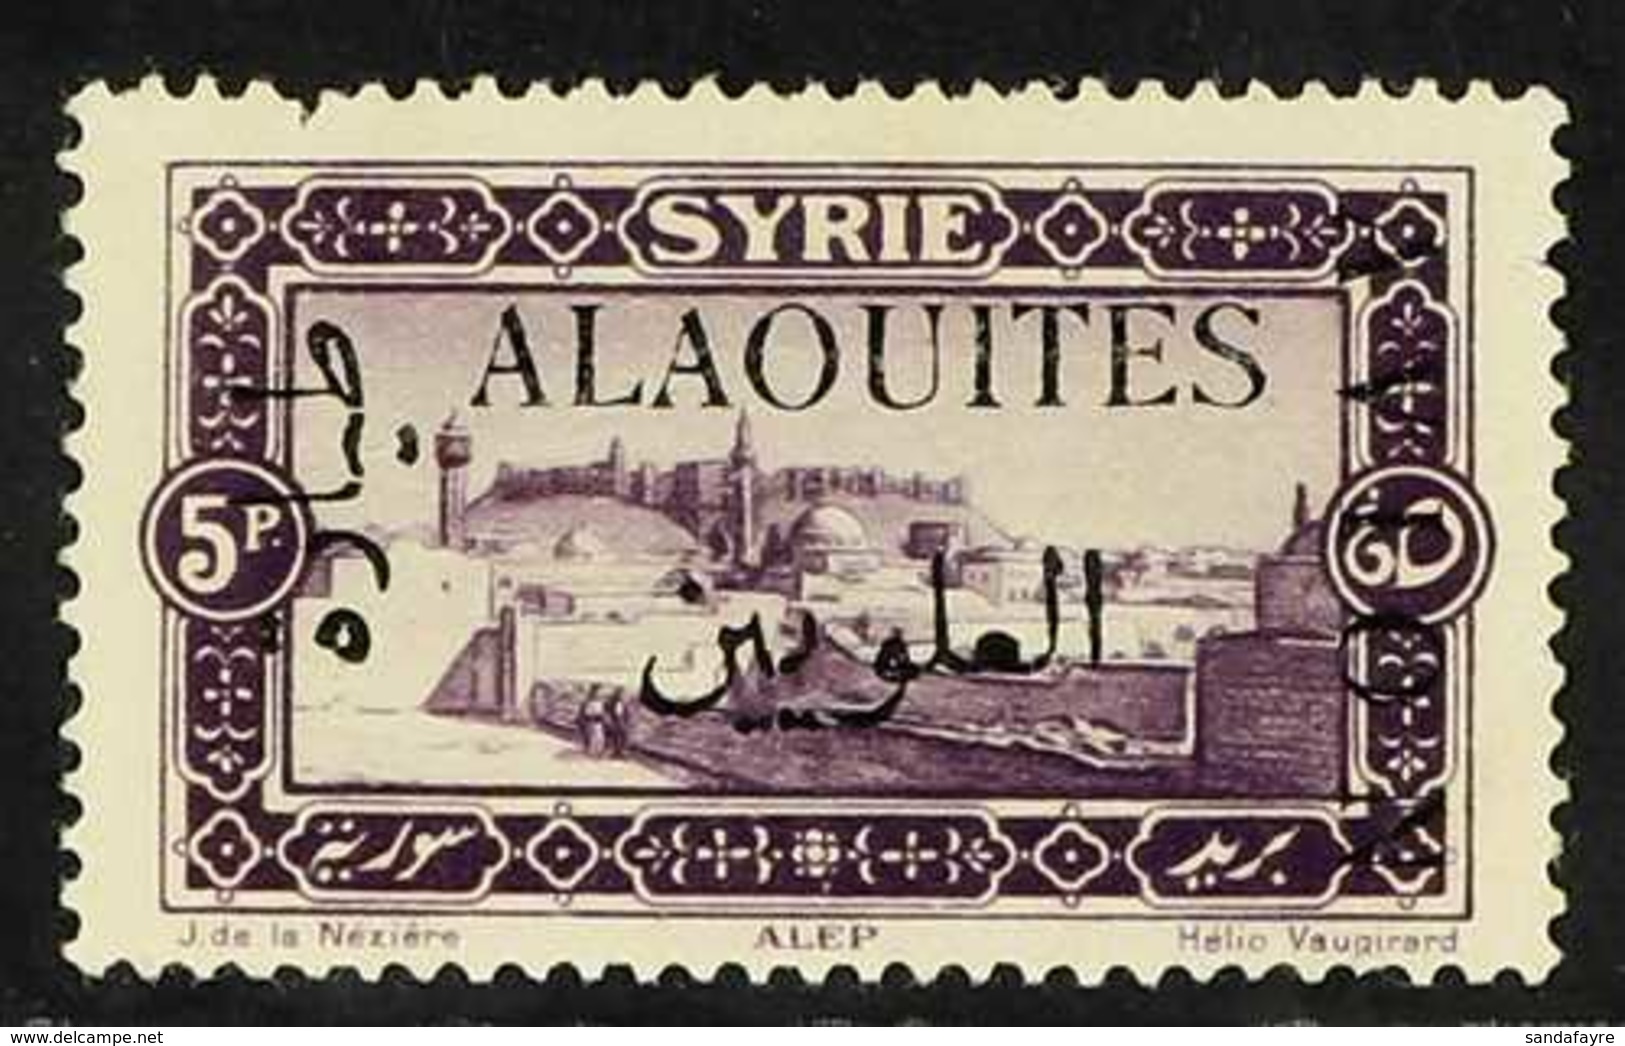 ALAOUITES 5pi Violet Air, Yv7, Variety "ovpt In Black, Avion To Right", Mint. Small Fault At Top. Cat €320 For More Imag - Syrie